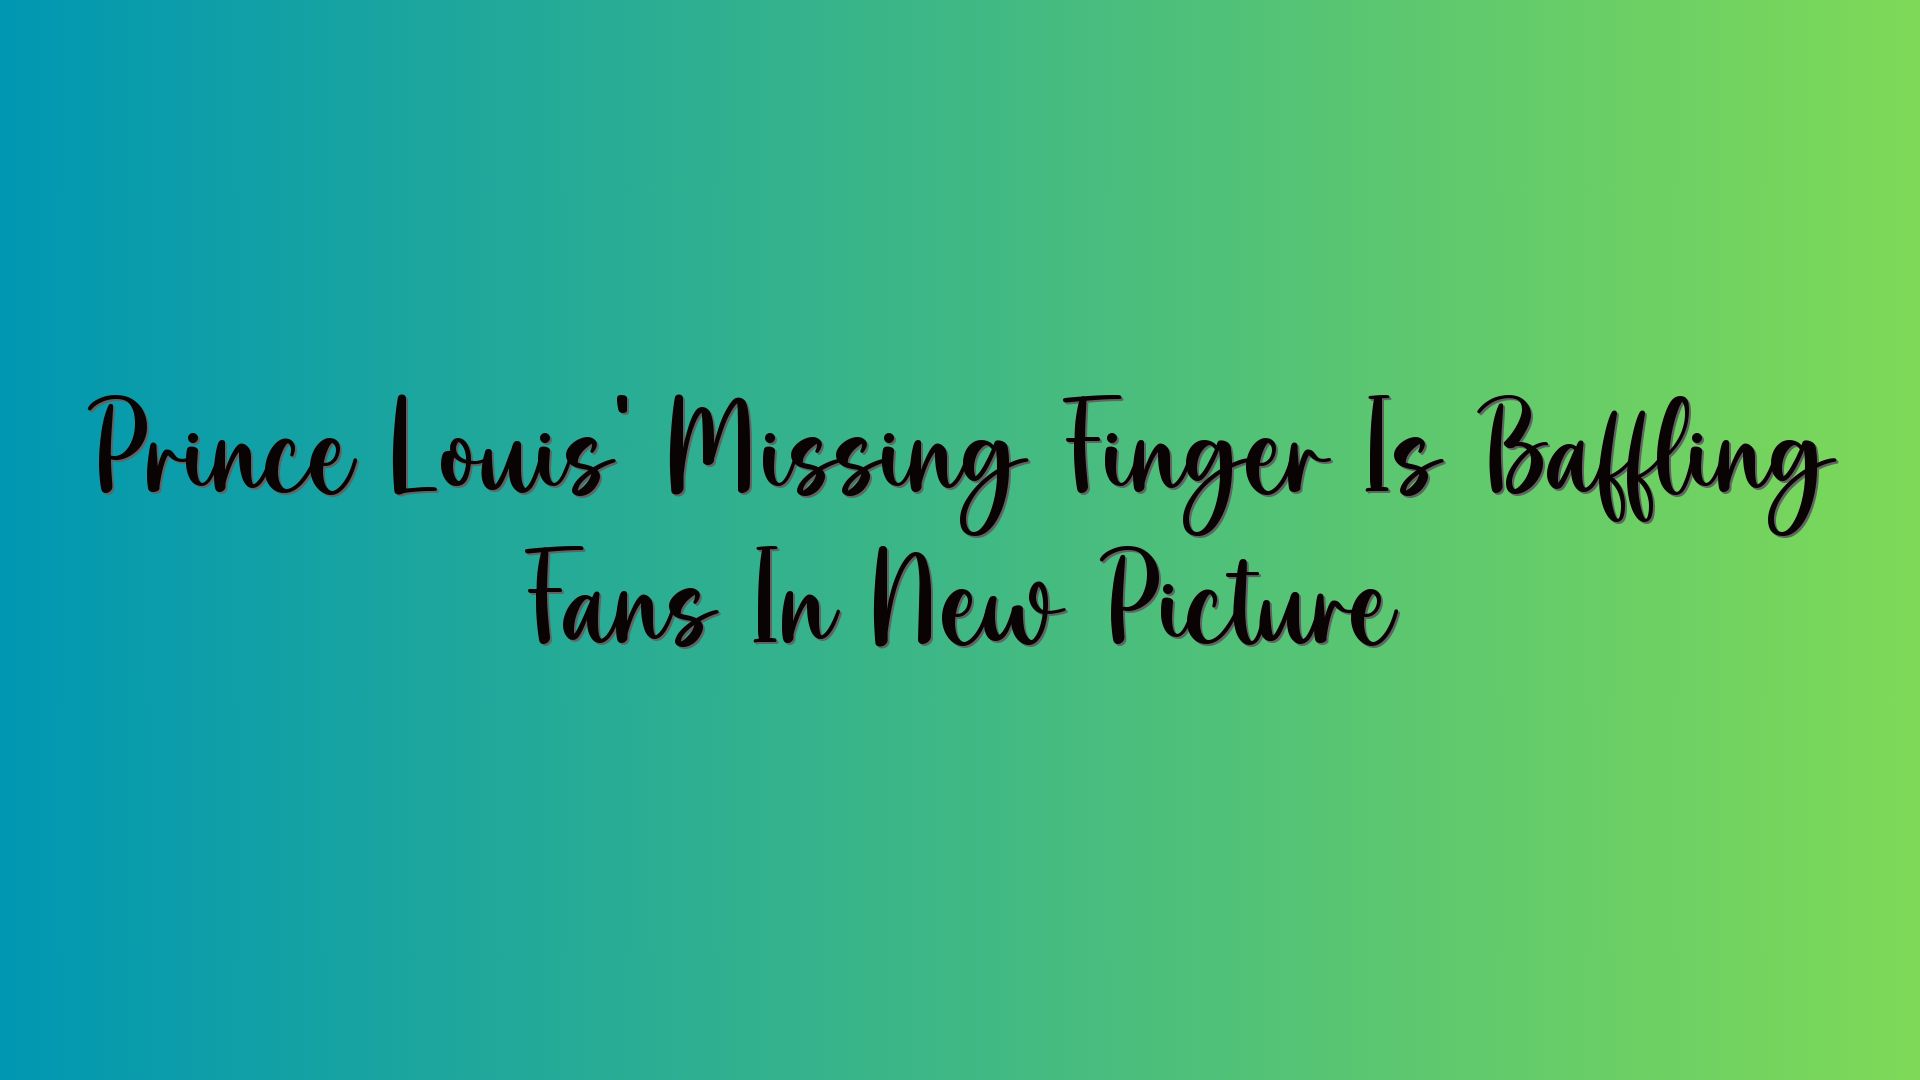 Prince Louis’ Missing Finger Is Baffling Fans In New Picture